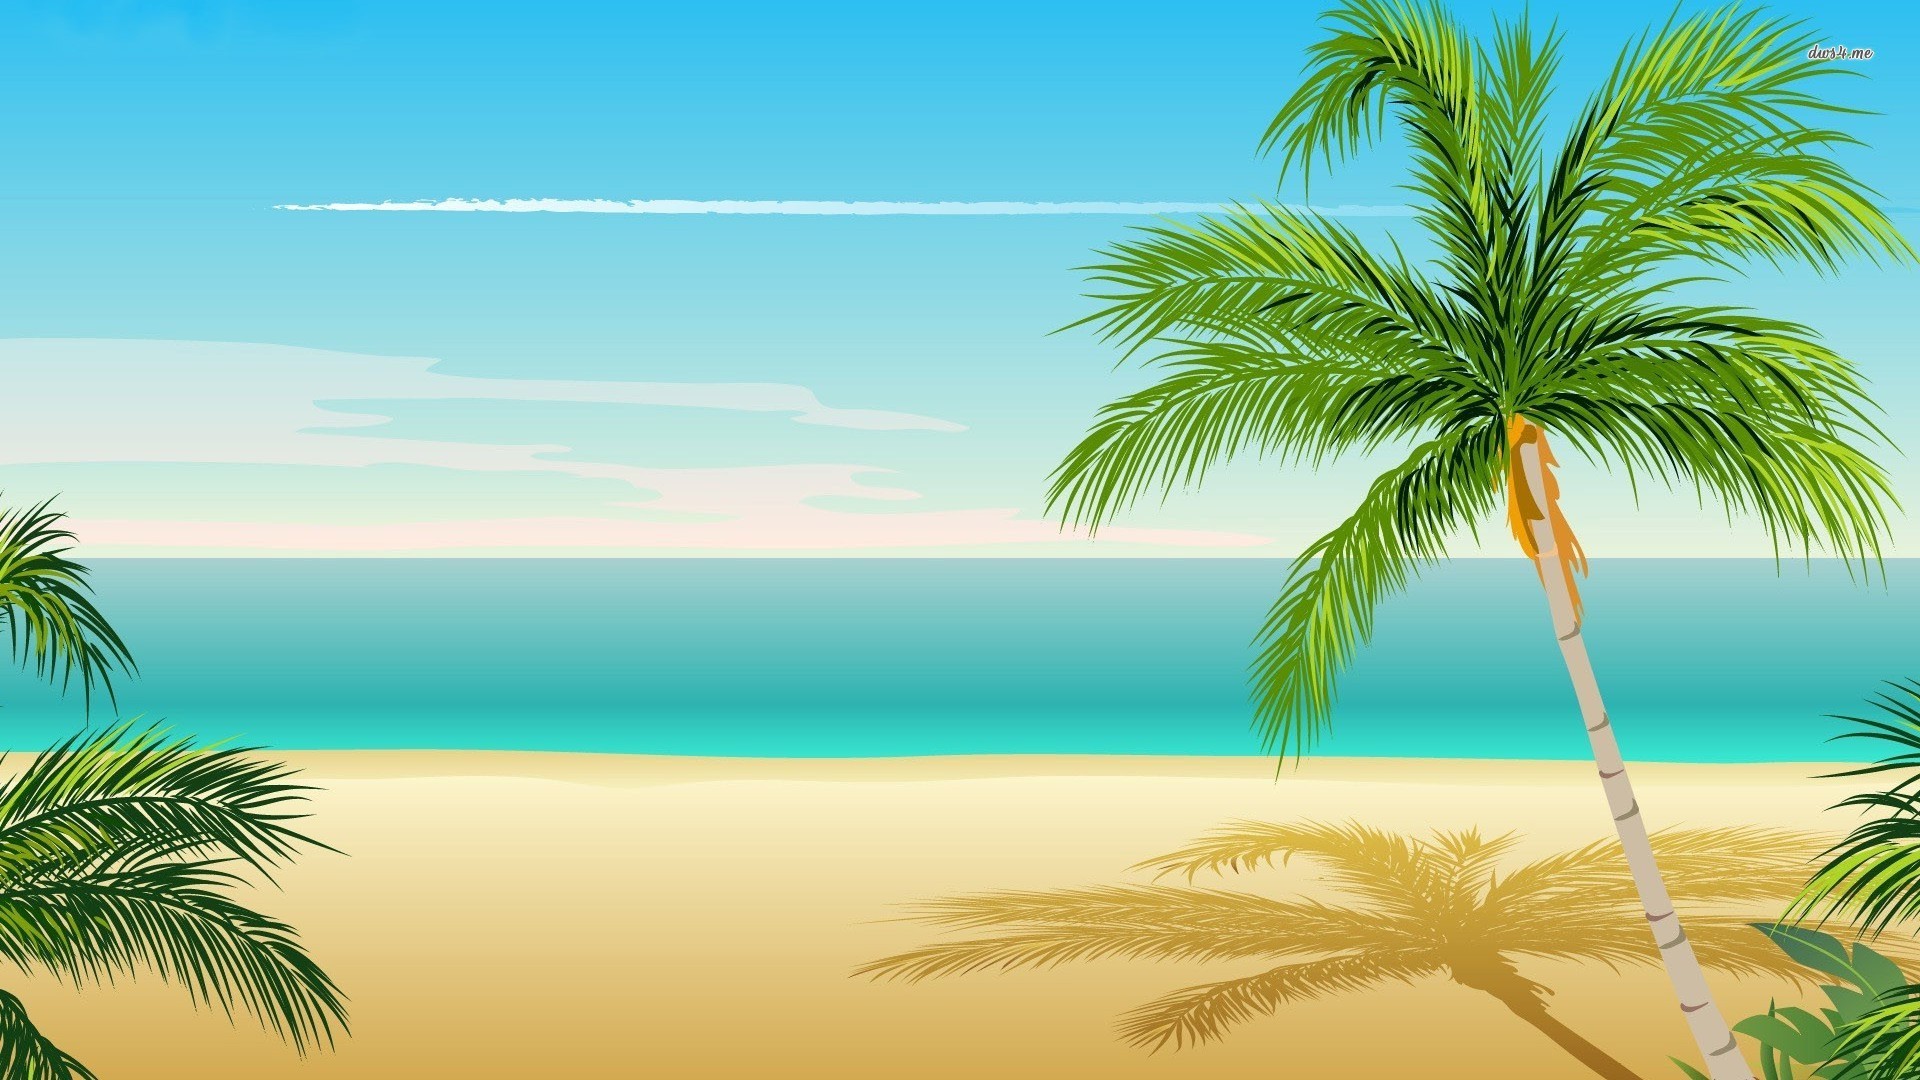 1920x1080 Palm tree wallpaper - Vector wallpapers - #7444